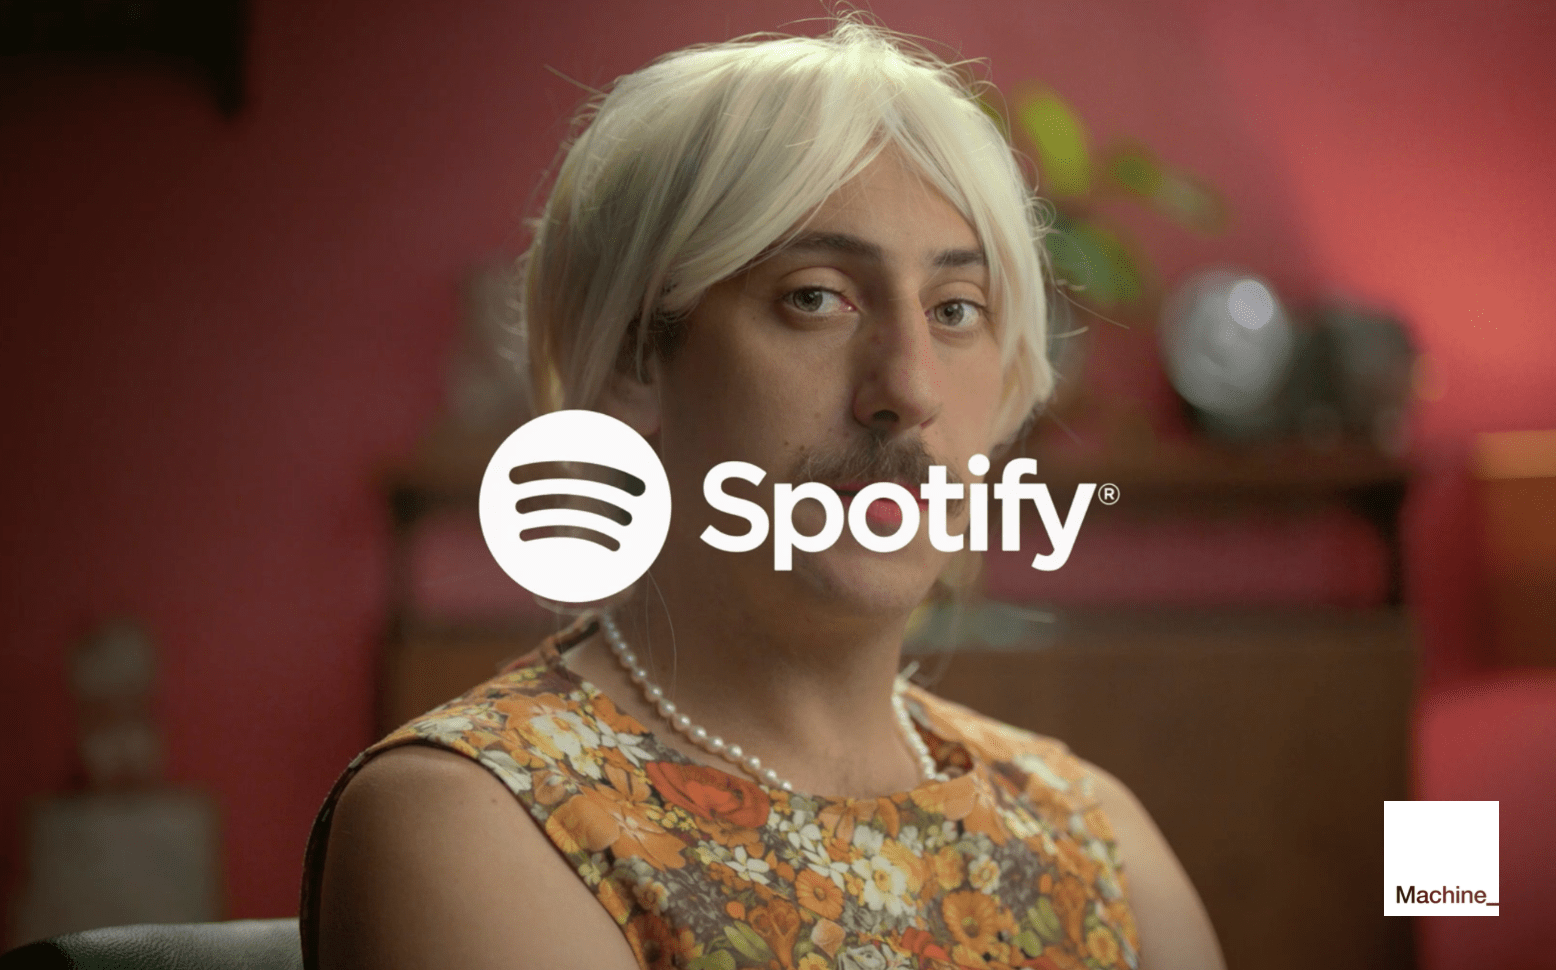 Spotify Afrikaans Campaign